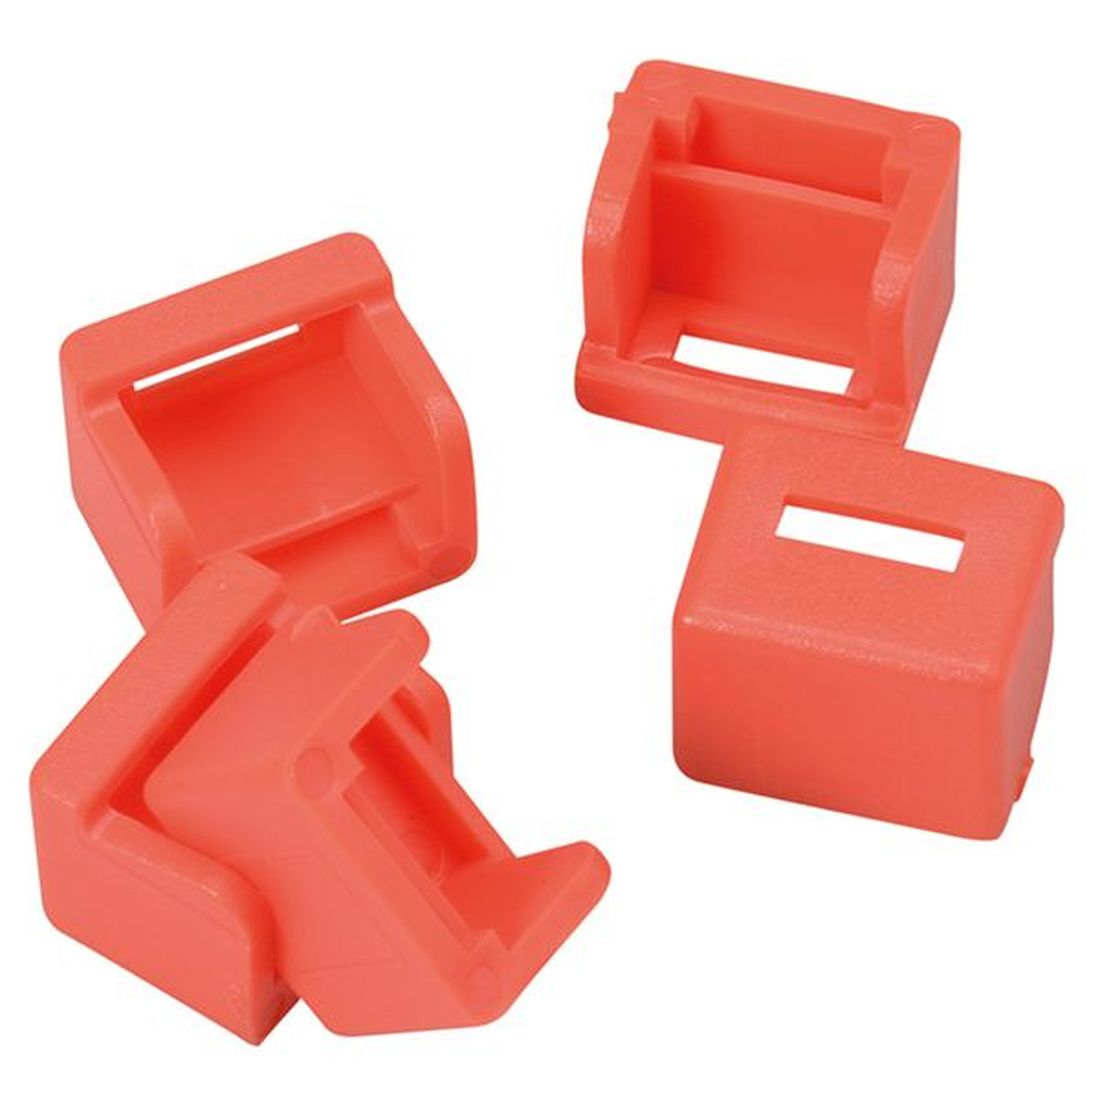 Tacwise 0849 Spare Nose Pieces for 191EL (Pack of 5)                                    